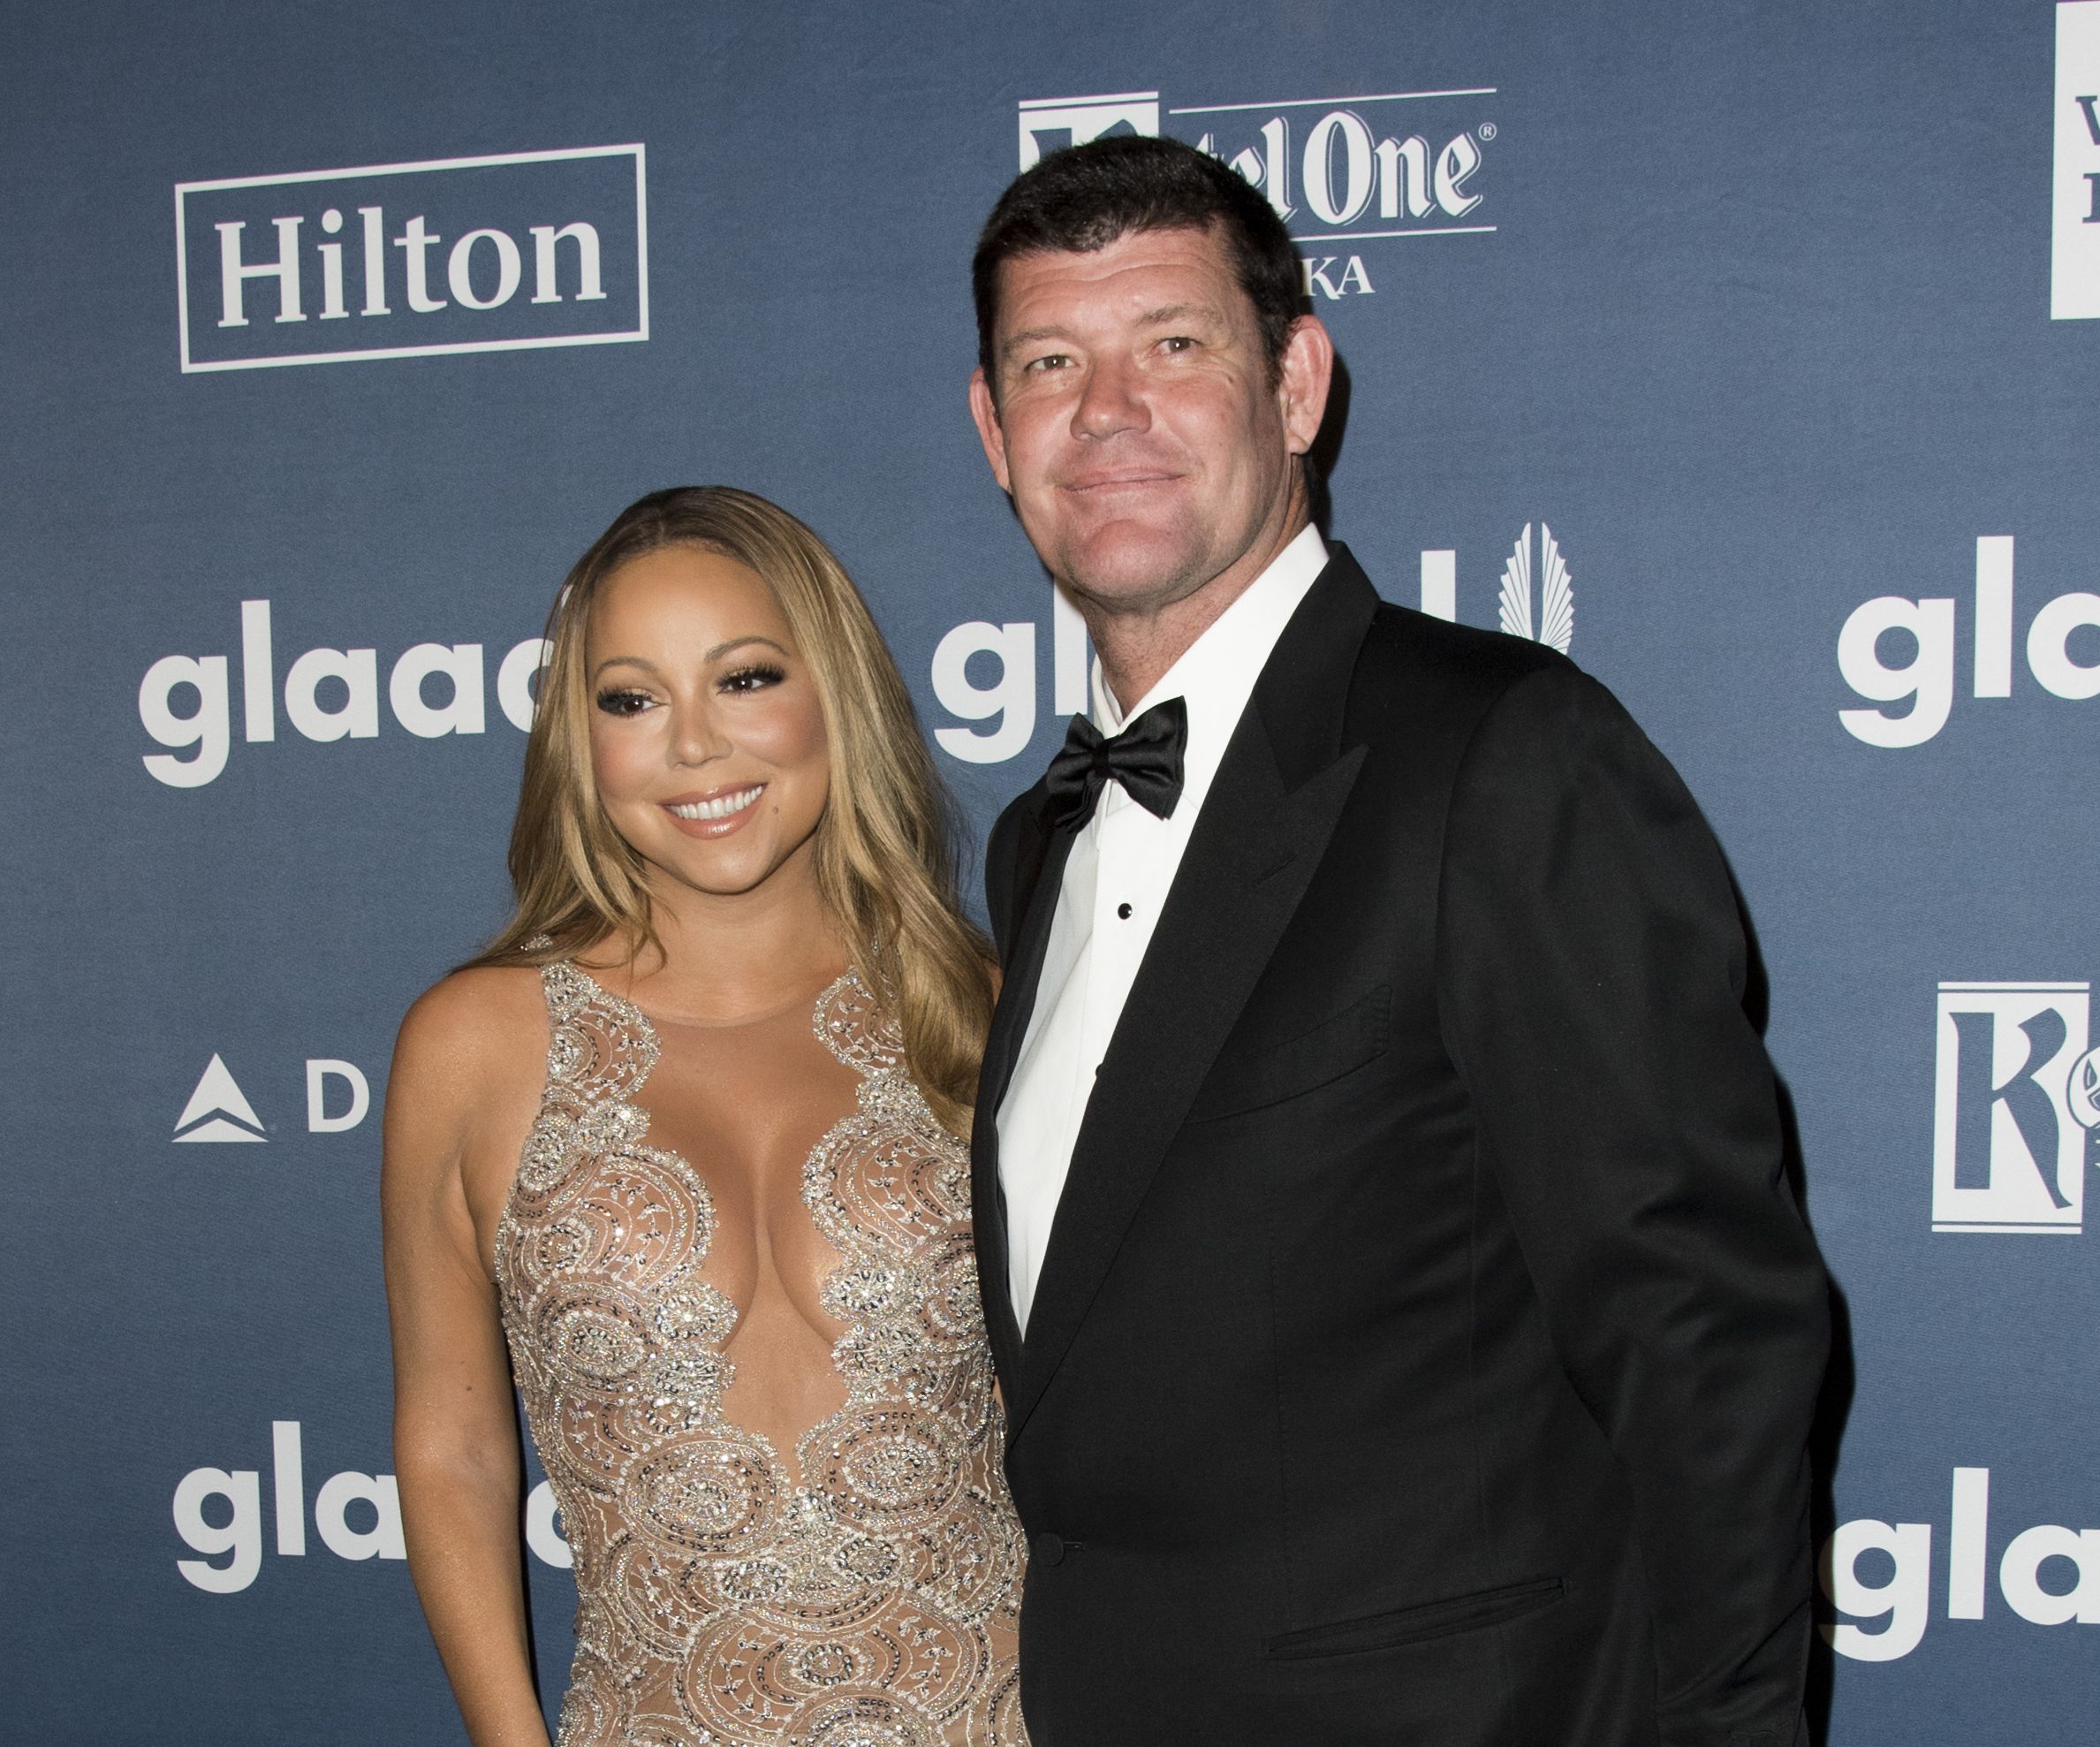 Mariah Carey Is Still Wearing Her Diamond Engagement Ring From Ex